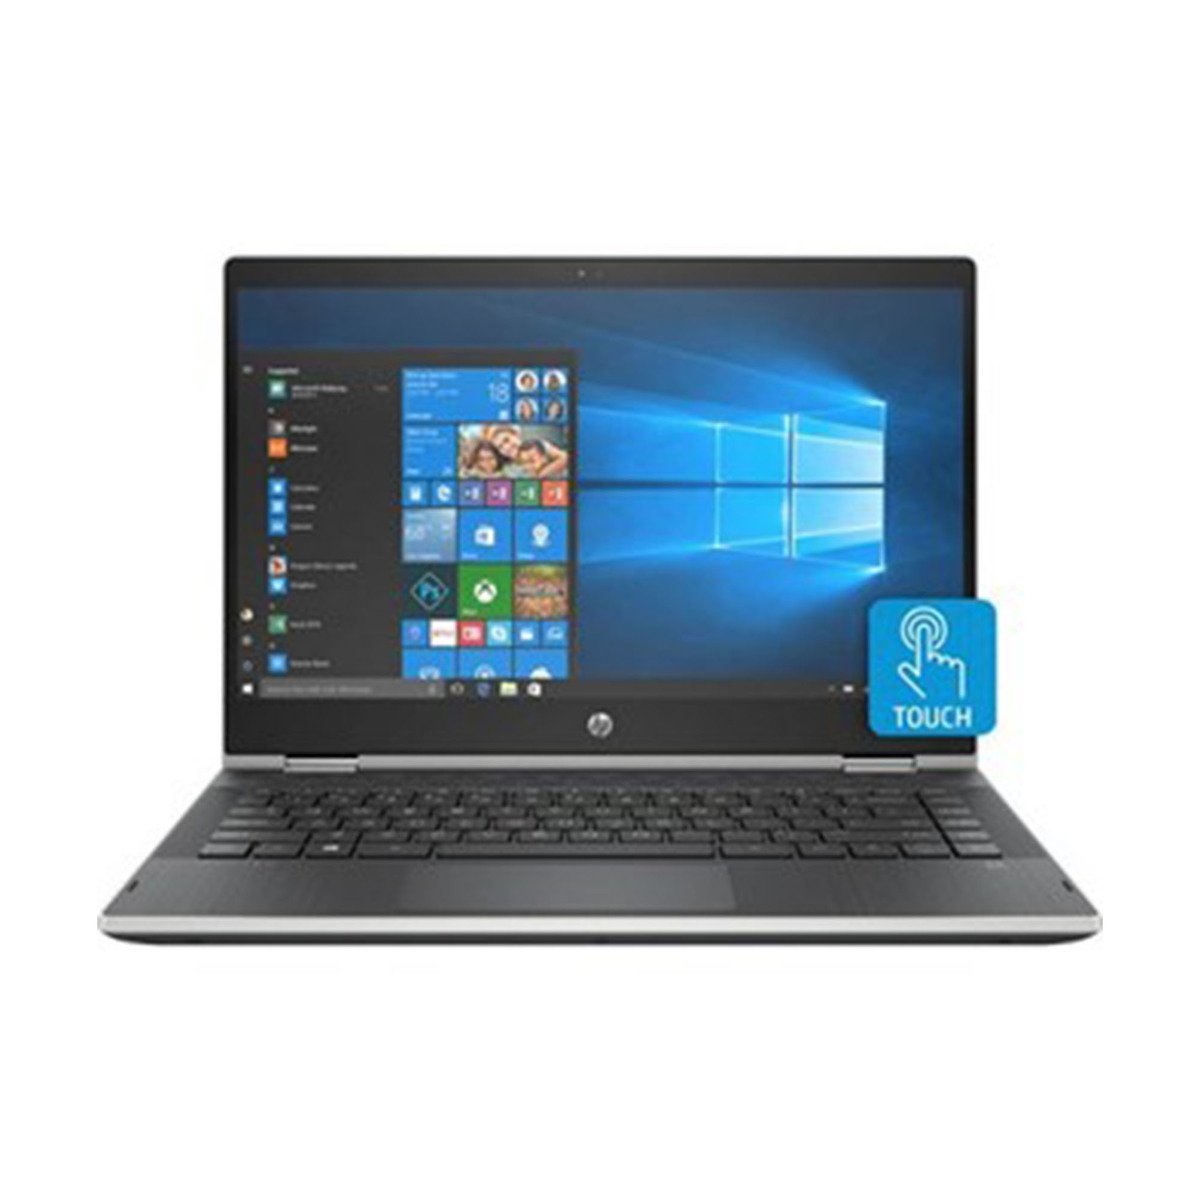 HP Pavilion 2in1 Notebook X360 14CD1010 Core i3 Silver